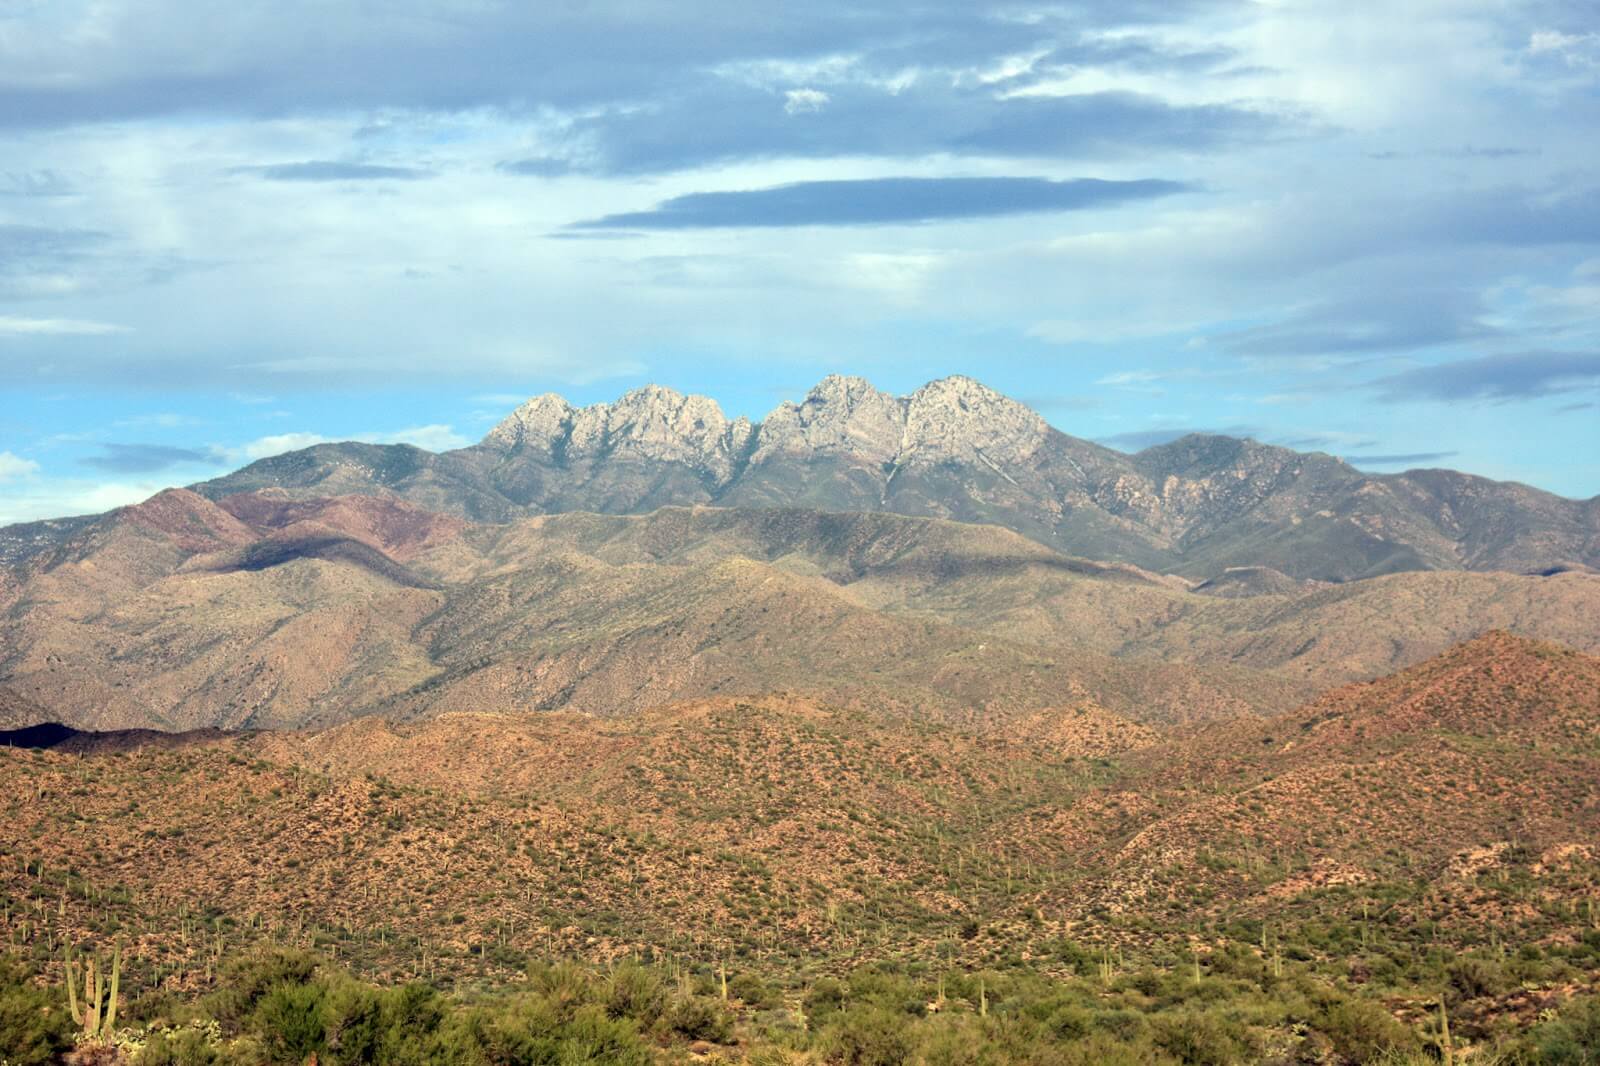 Browns Peak, on of the Four Peaks is in the distance with miles of desert land in front.